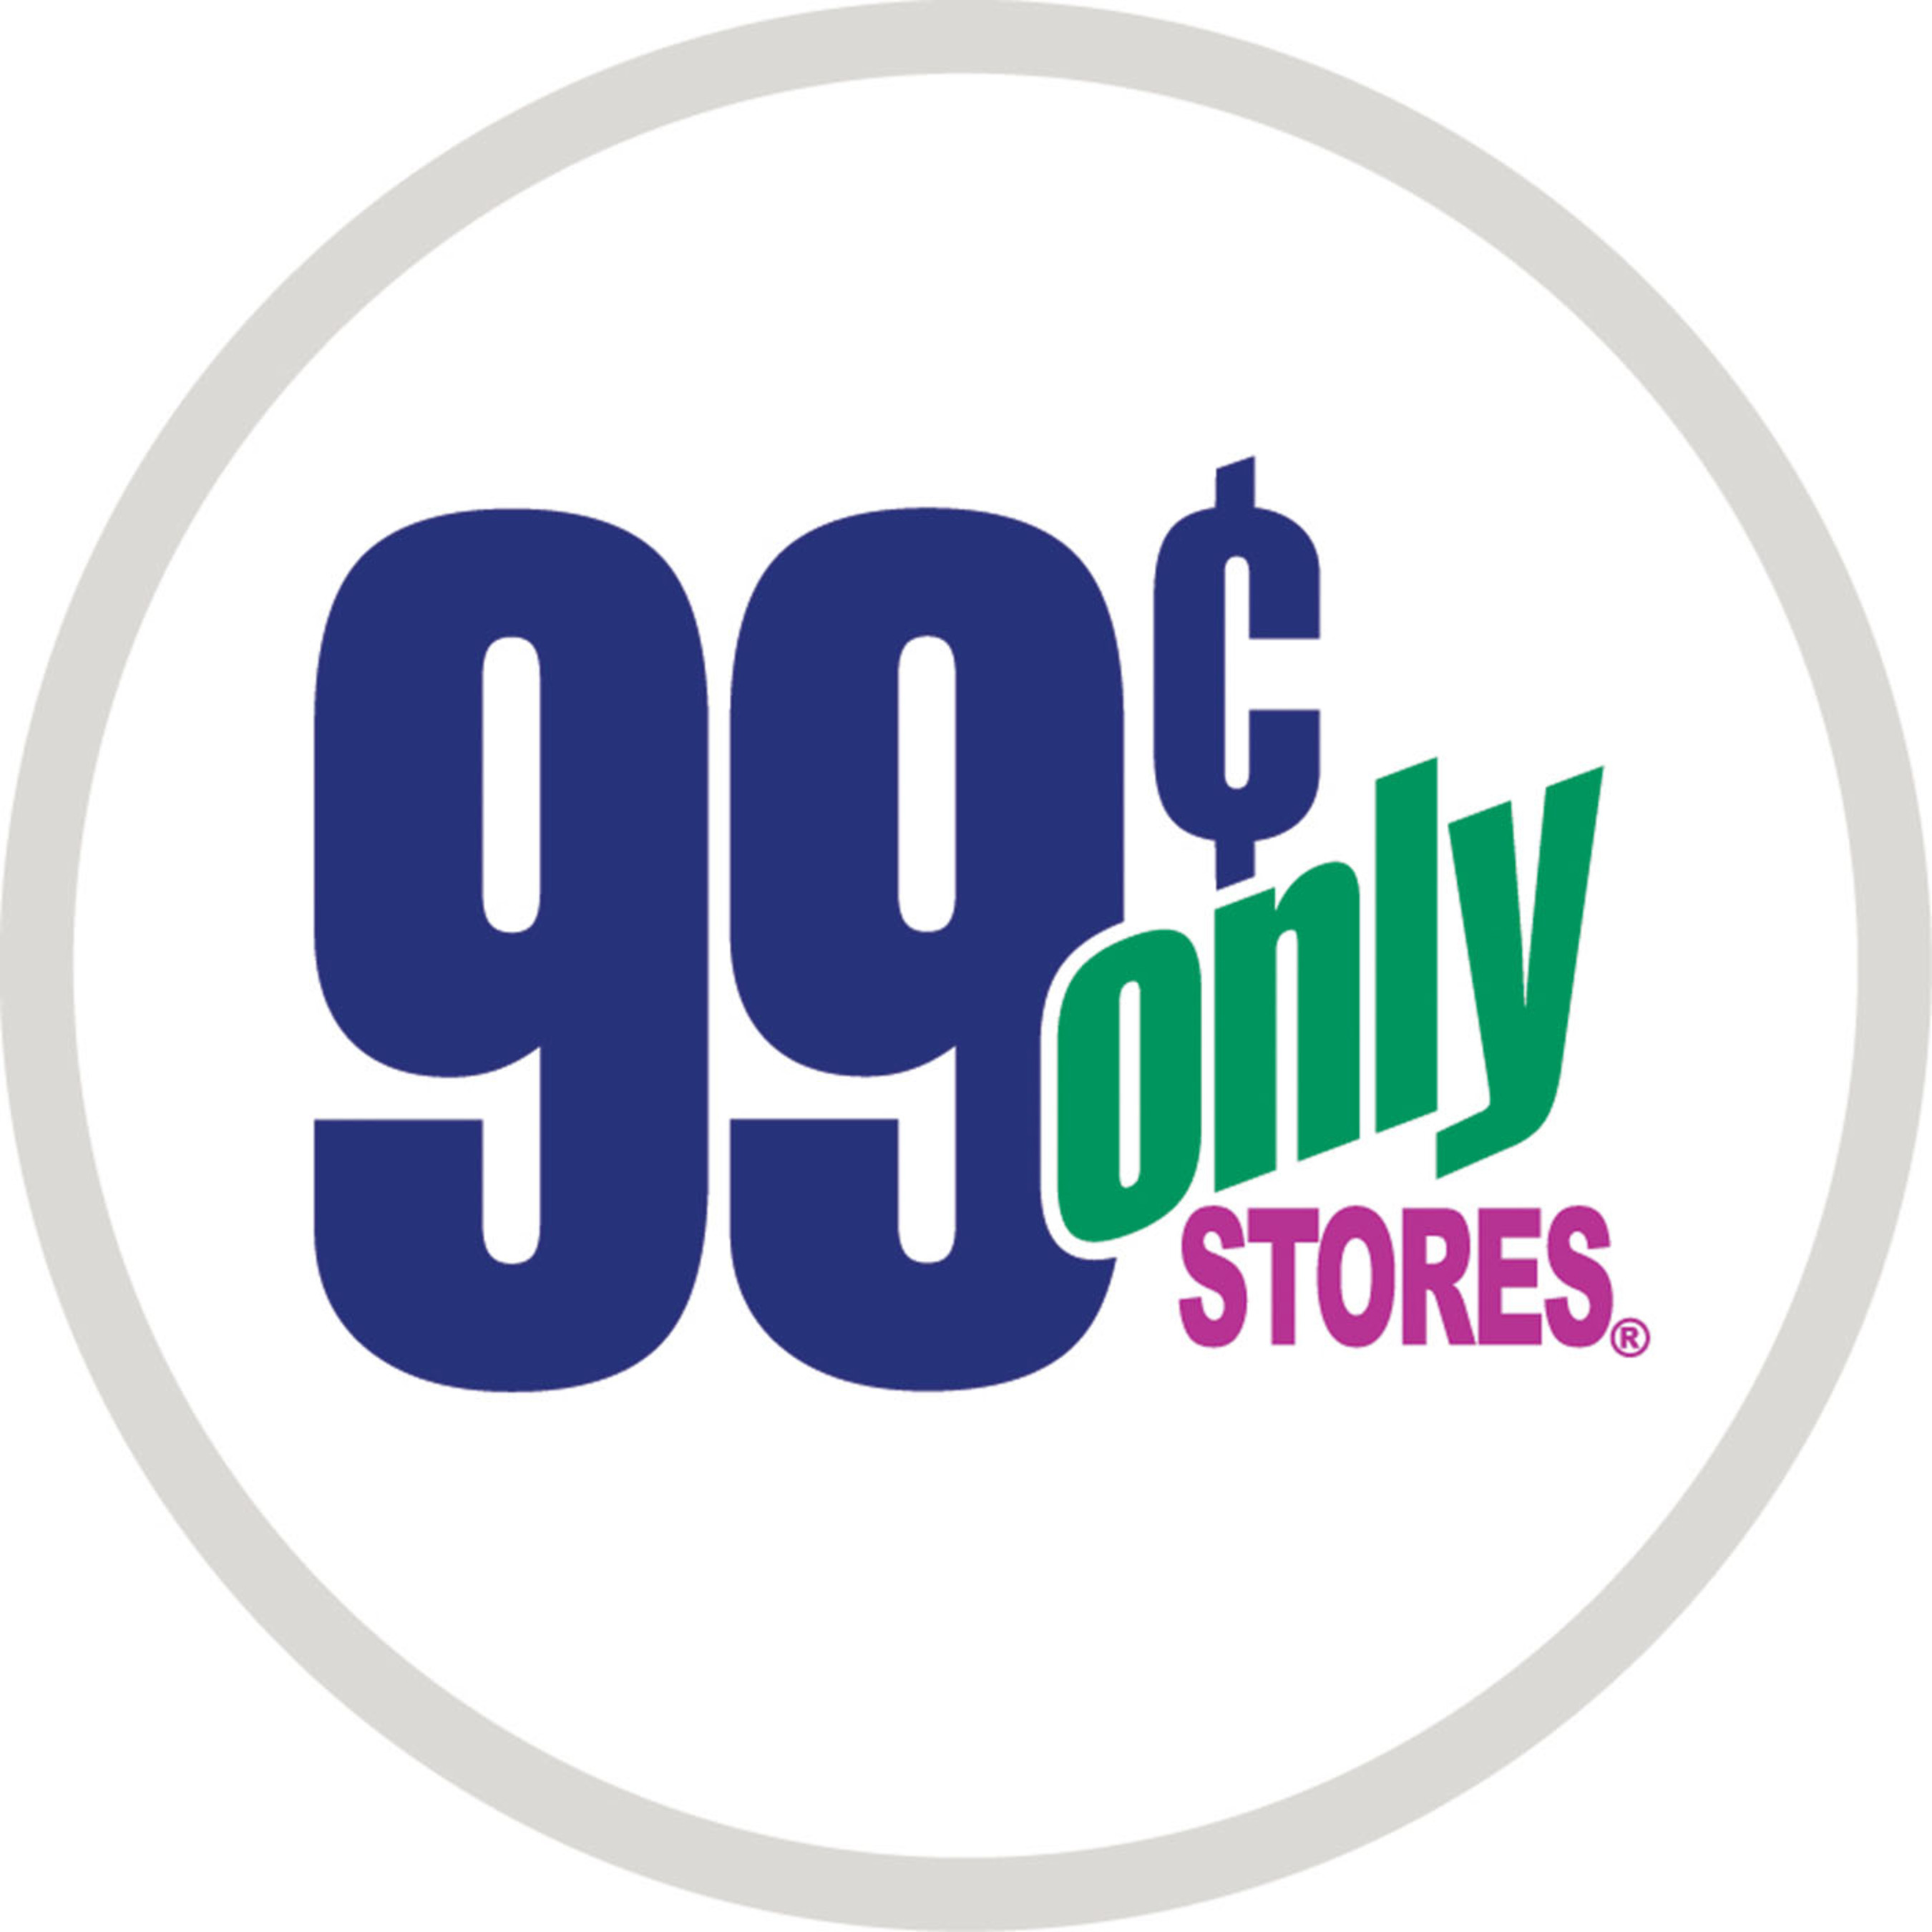 99 Cents Only Stores logo (new). (PRNewsFoto/99 Cents Only Stores) (PRNewsFoto/99 CENTS ONLY STORES)